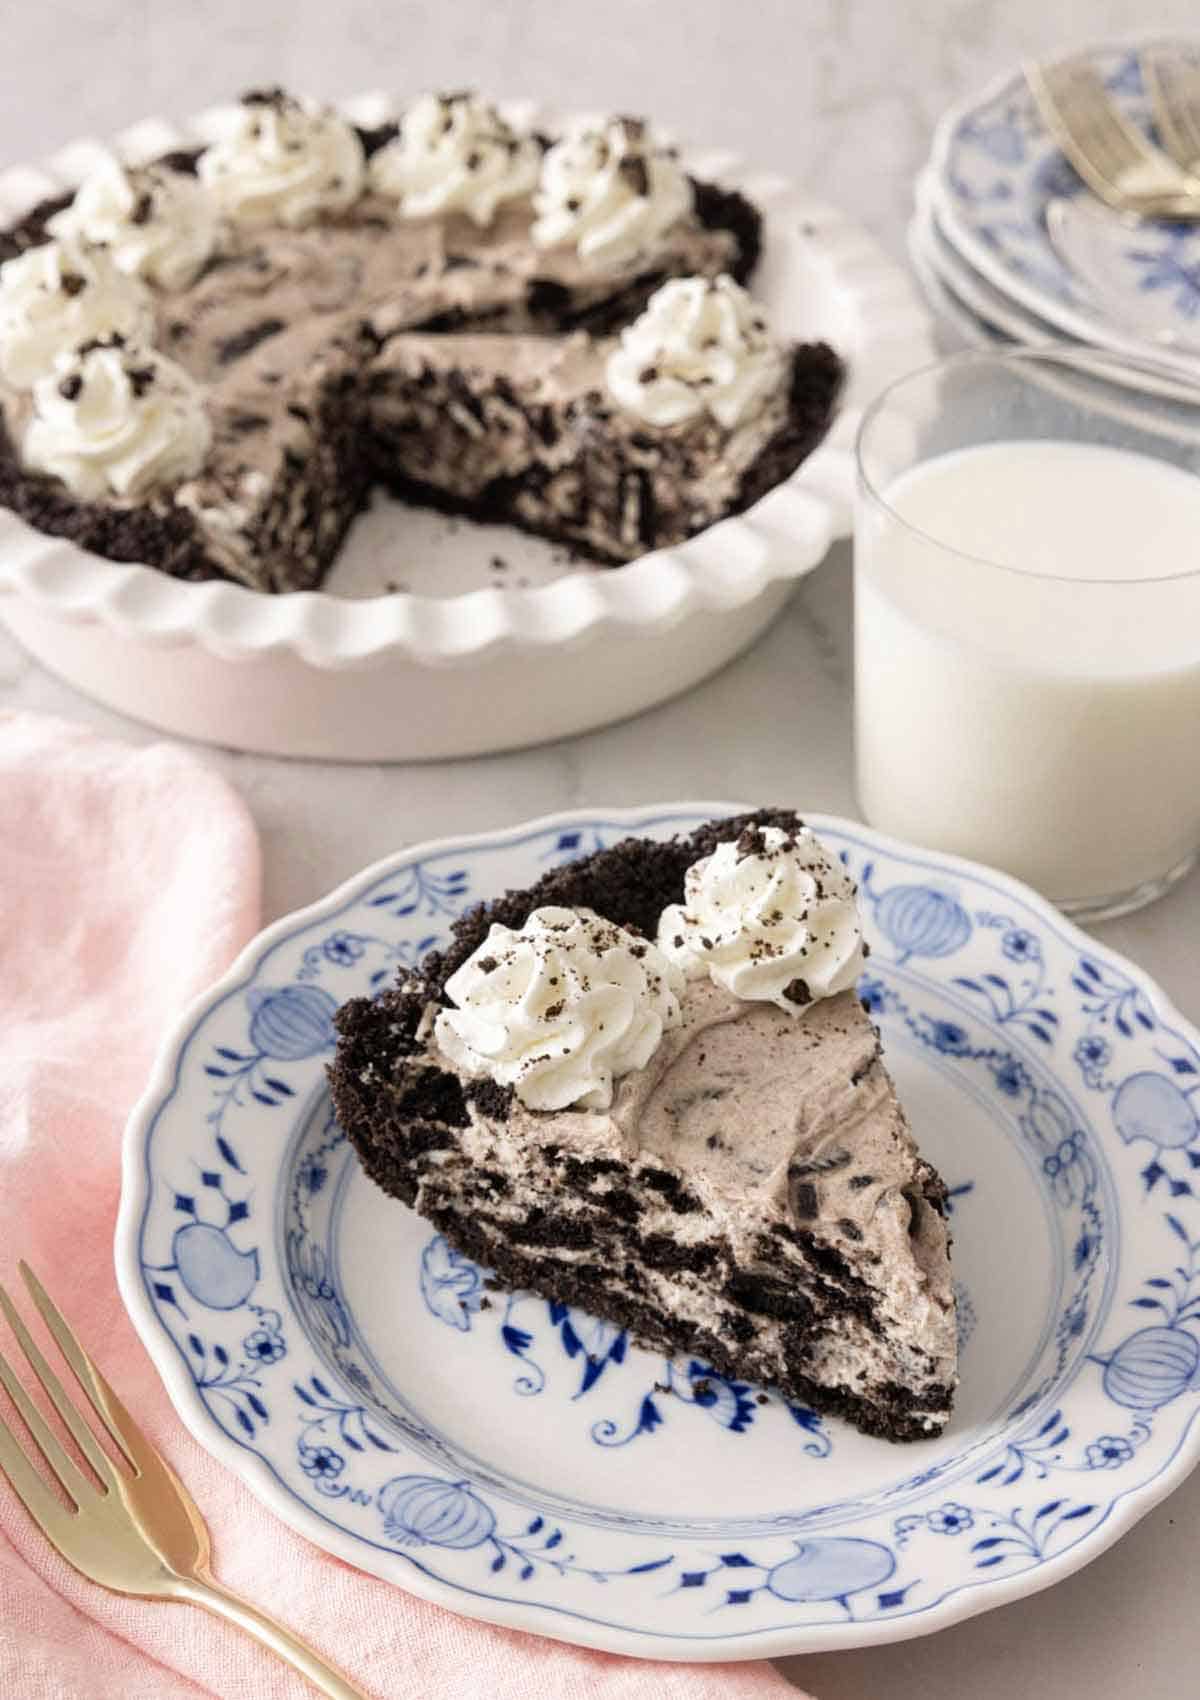 A slice of Oreo pie in front of a glass of milk and baking dish.